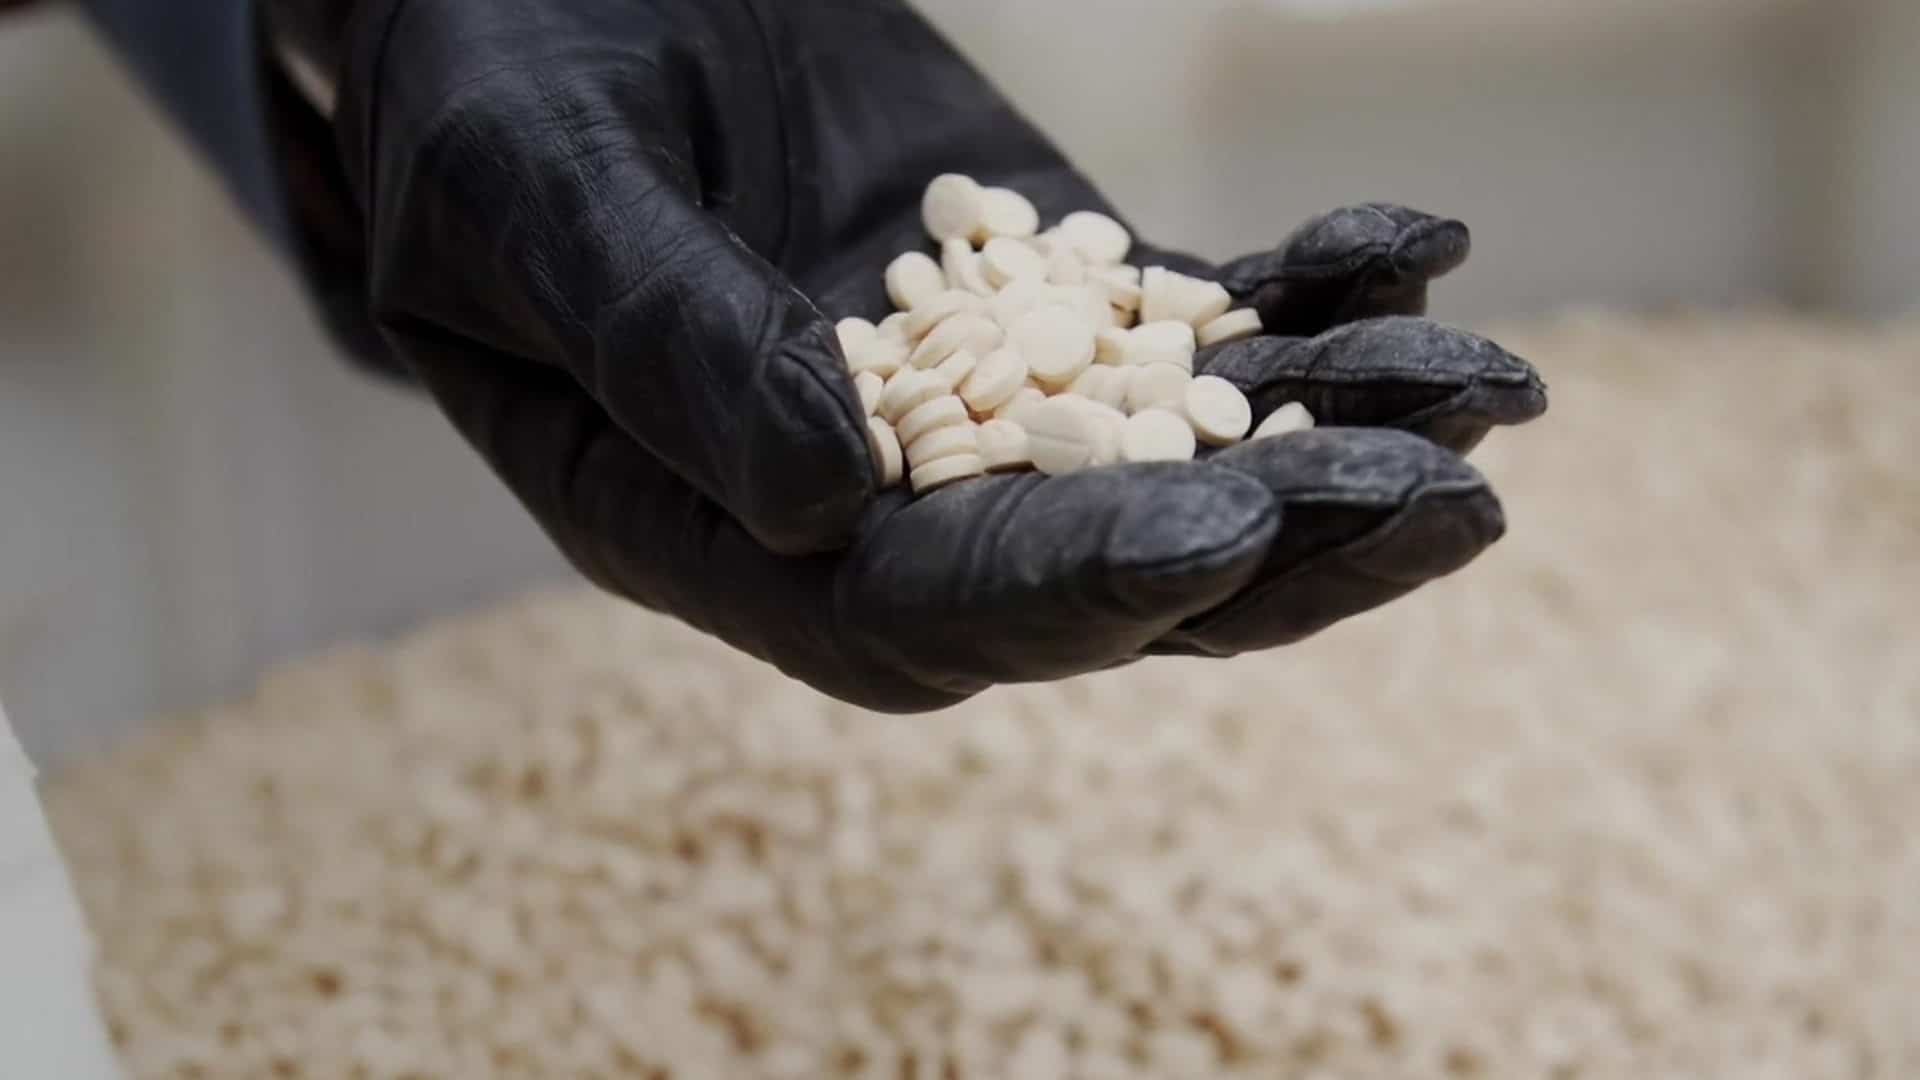 Attempts to smuggle 1.1 million Captagon pills into Saudi Arabia is foiled by ZATCA